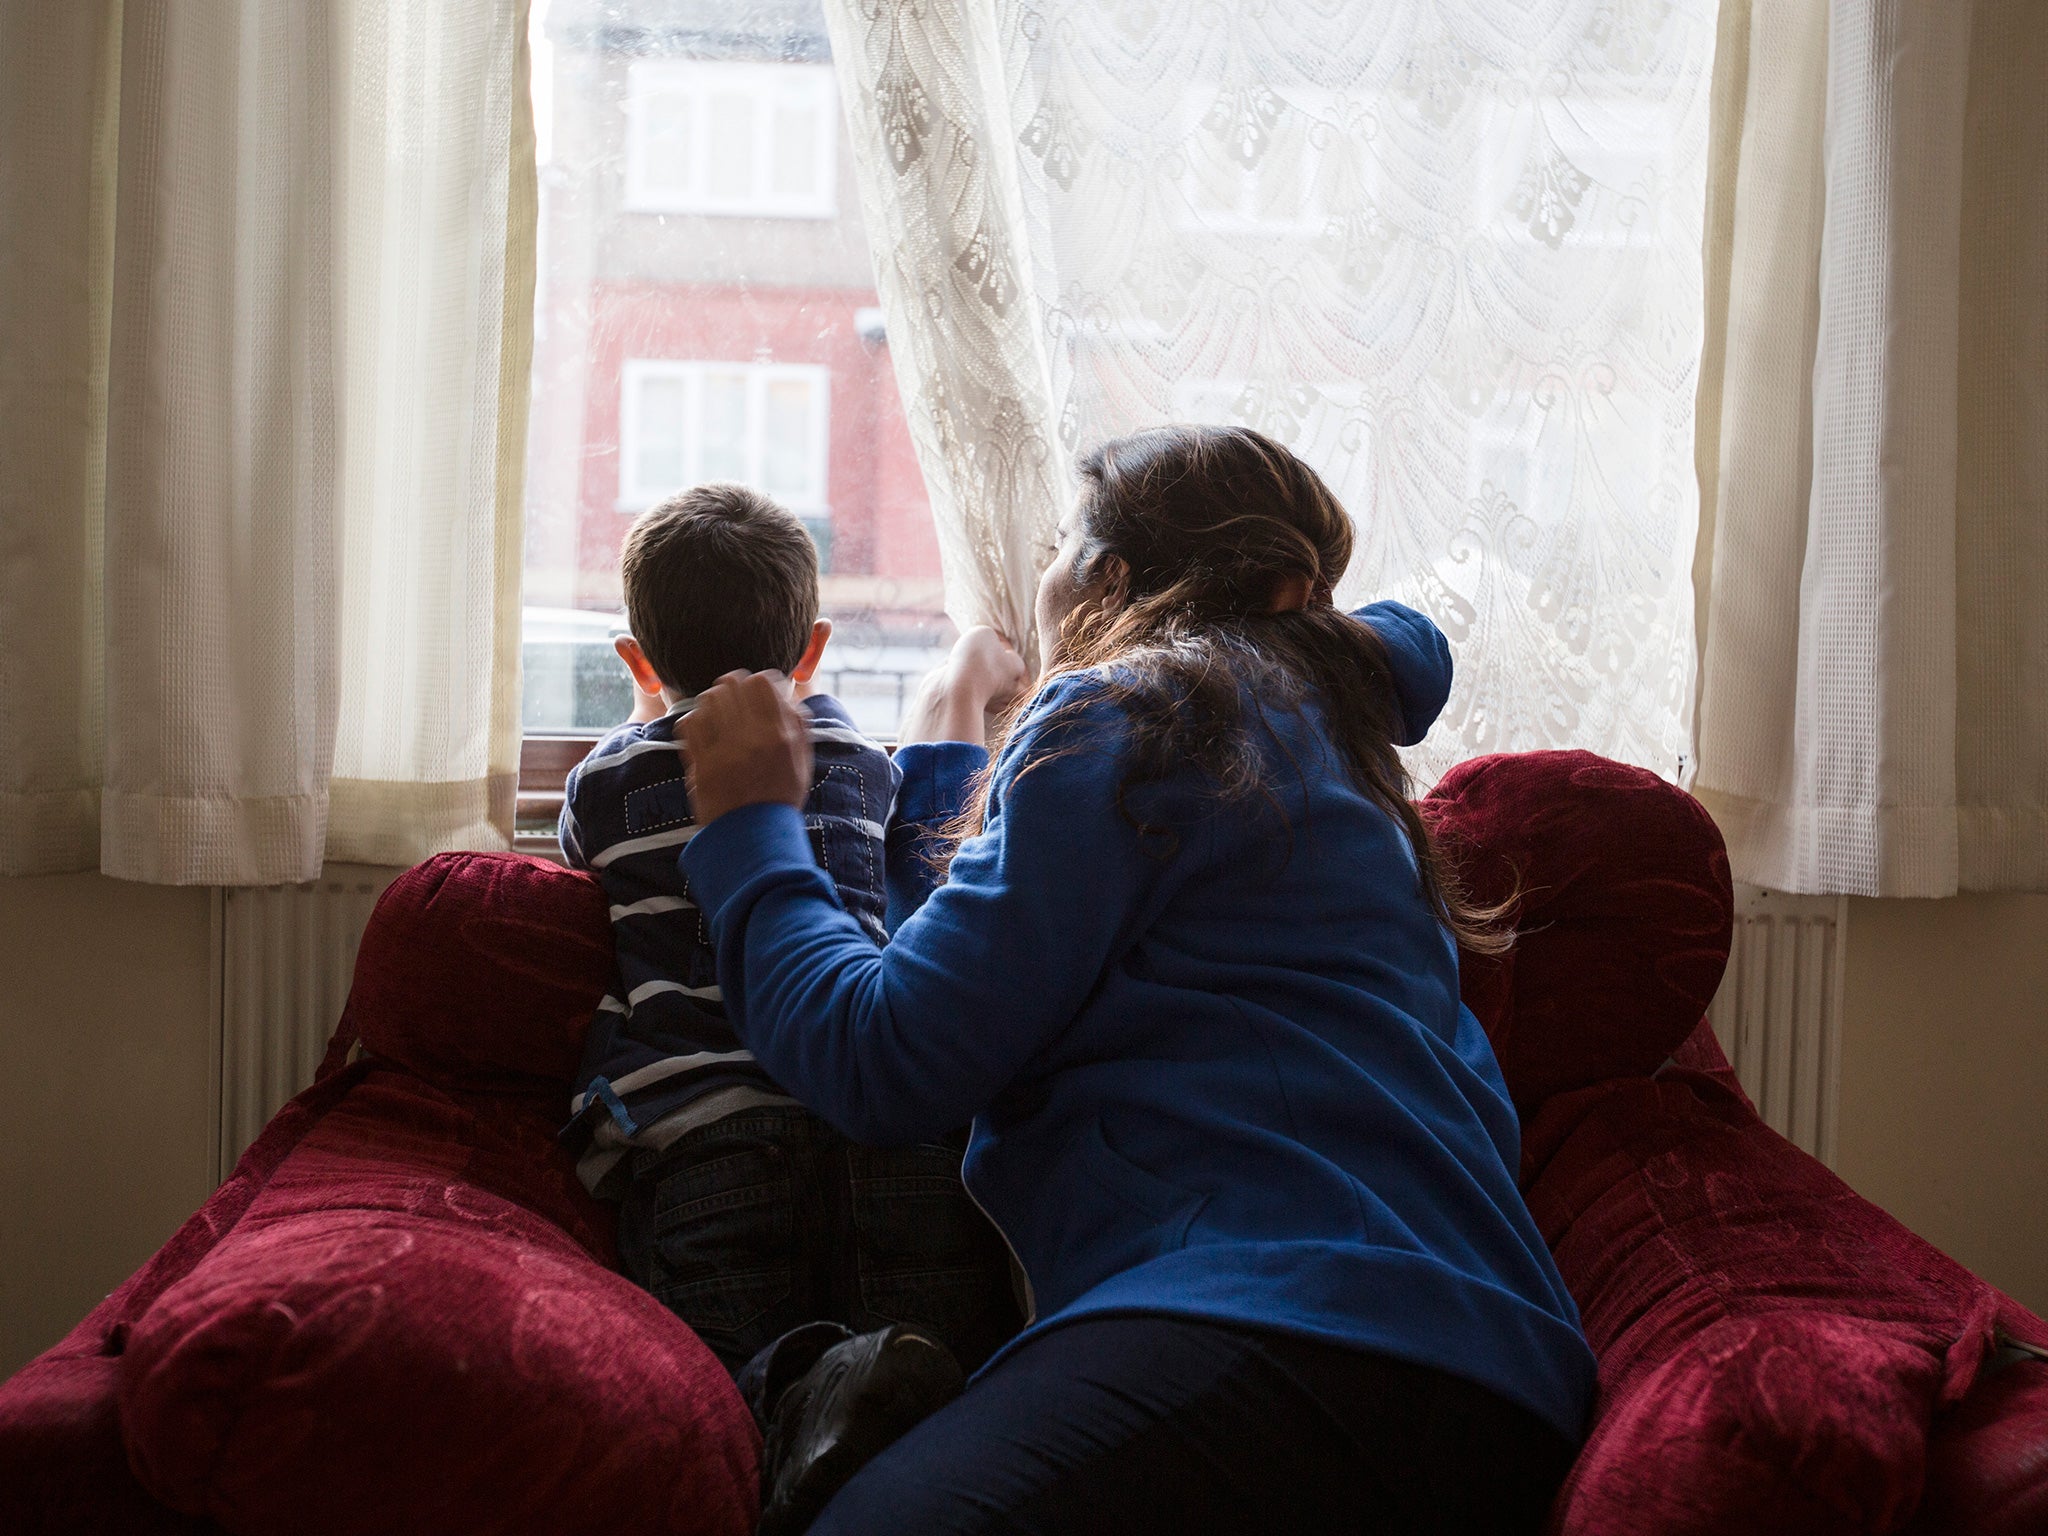 Hanan is one of many migrant survivors living in Britain